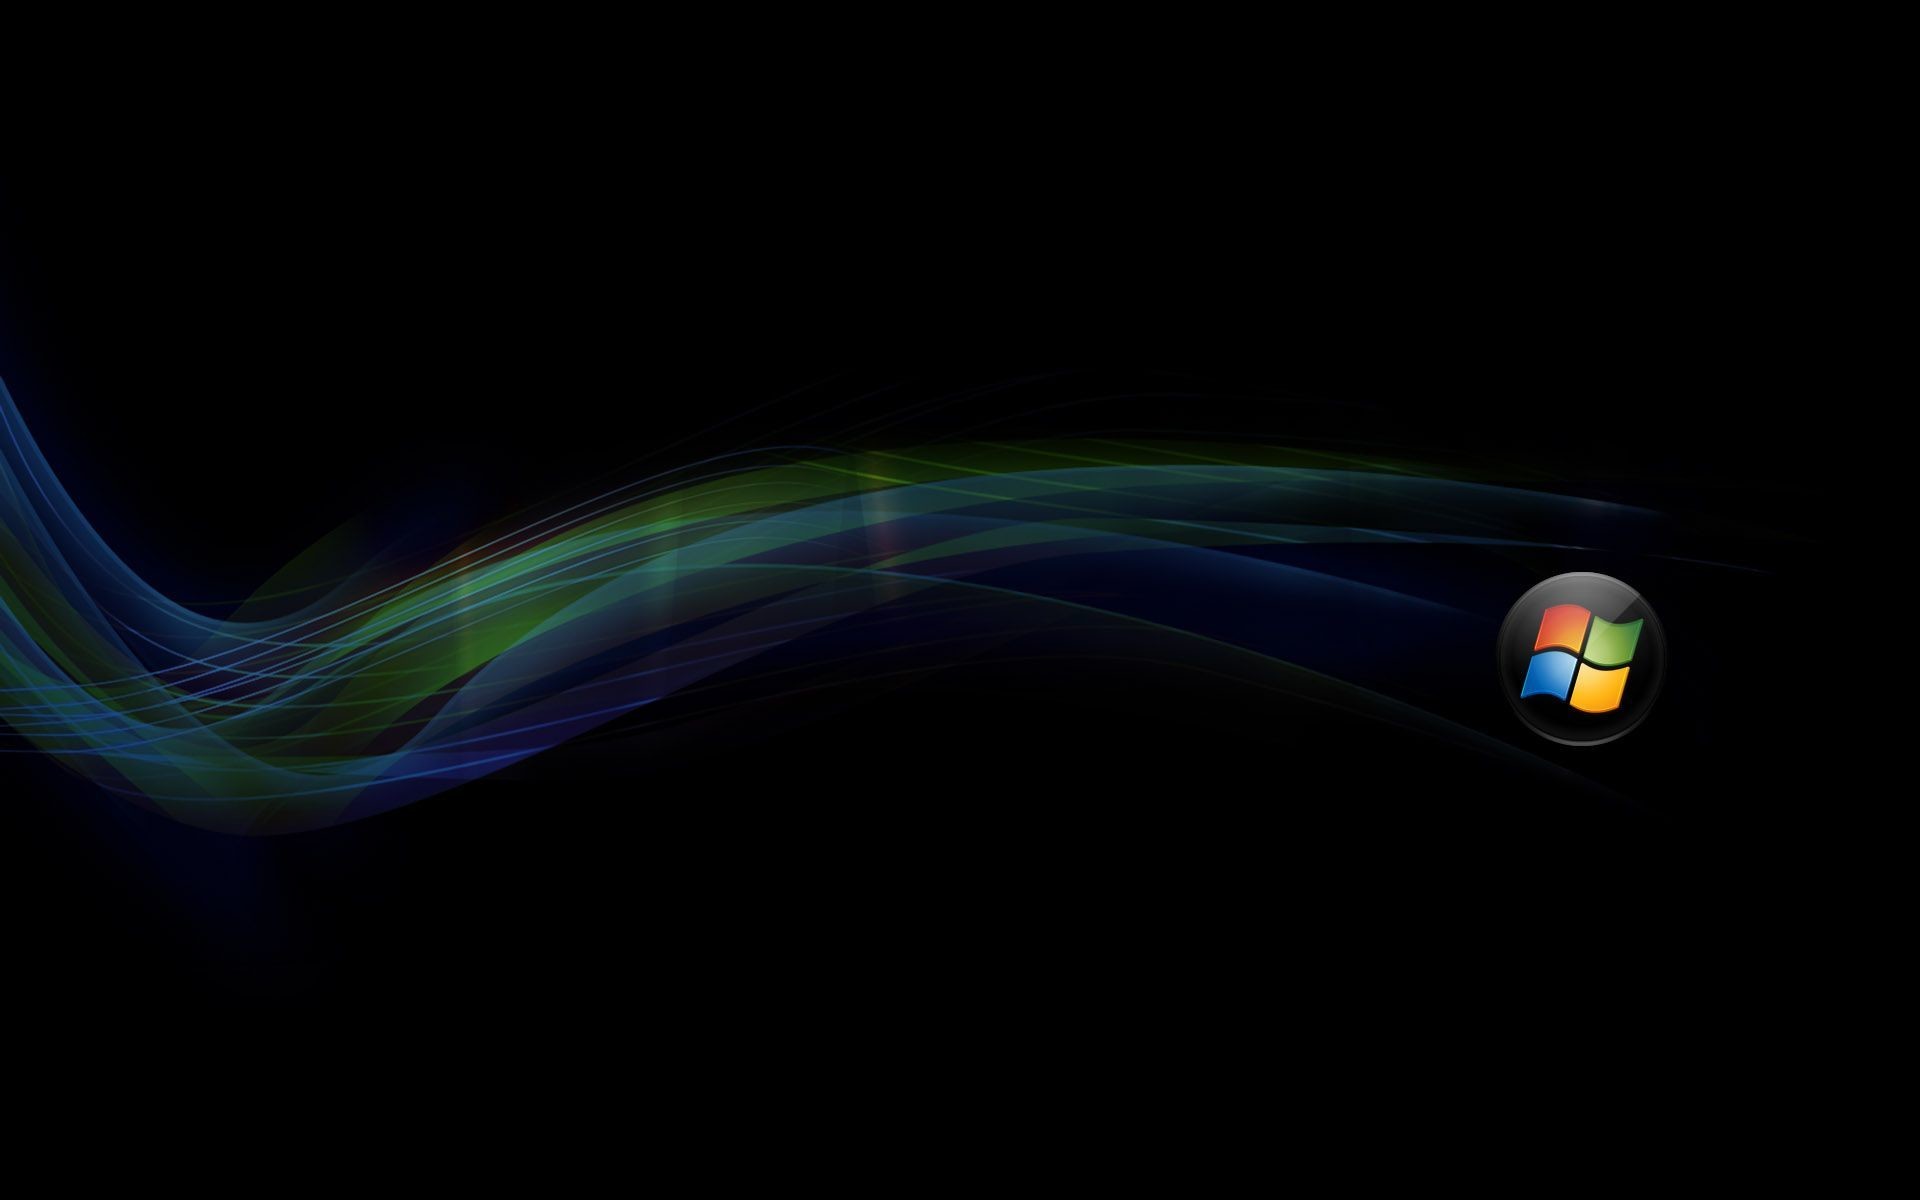 1920x1200 Widescreen Wallpapers of Microsoft Windows 7, Newest Photo